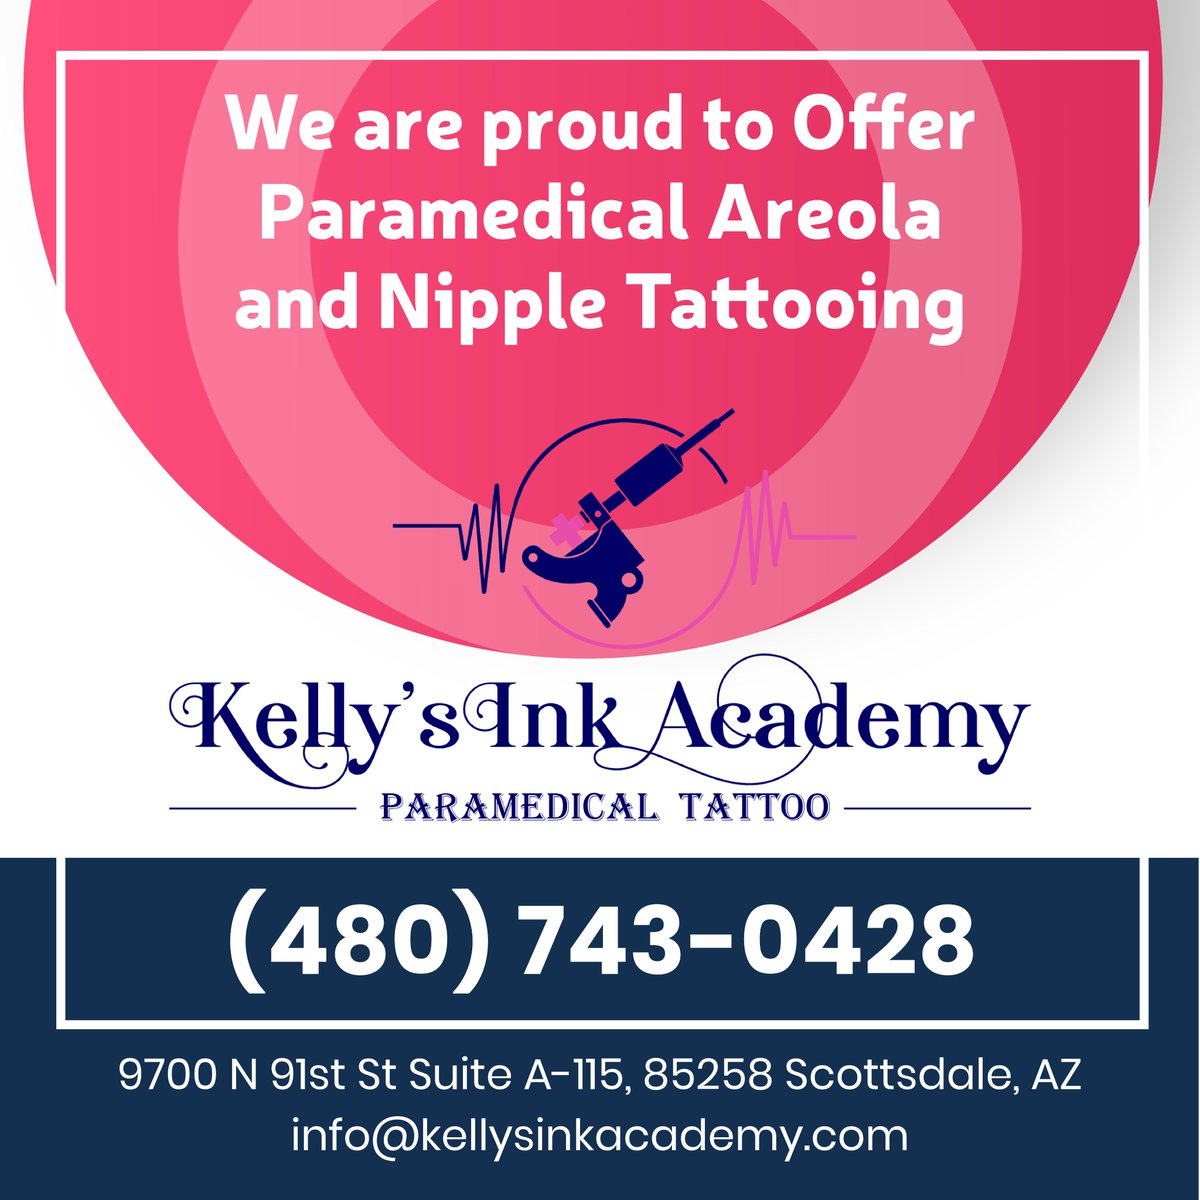 We are proud to Offer
Paramedical Areola
and Nipple Tattooing at Kelly's Ink Academy
Call us for Free Appointment (480) 743-0428
#paramedicsofinstagram #micropigmentacaoparamedica #paramedicscience #paramedicstudents #savageparamedics #paramedicgirl #paramedicaltattooing